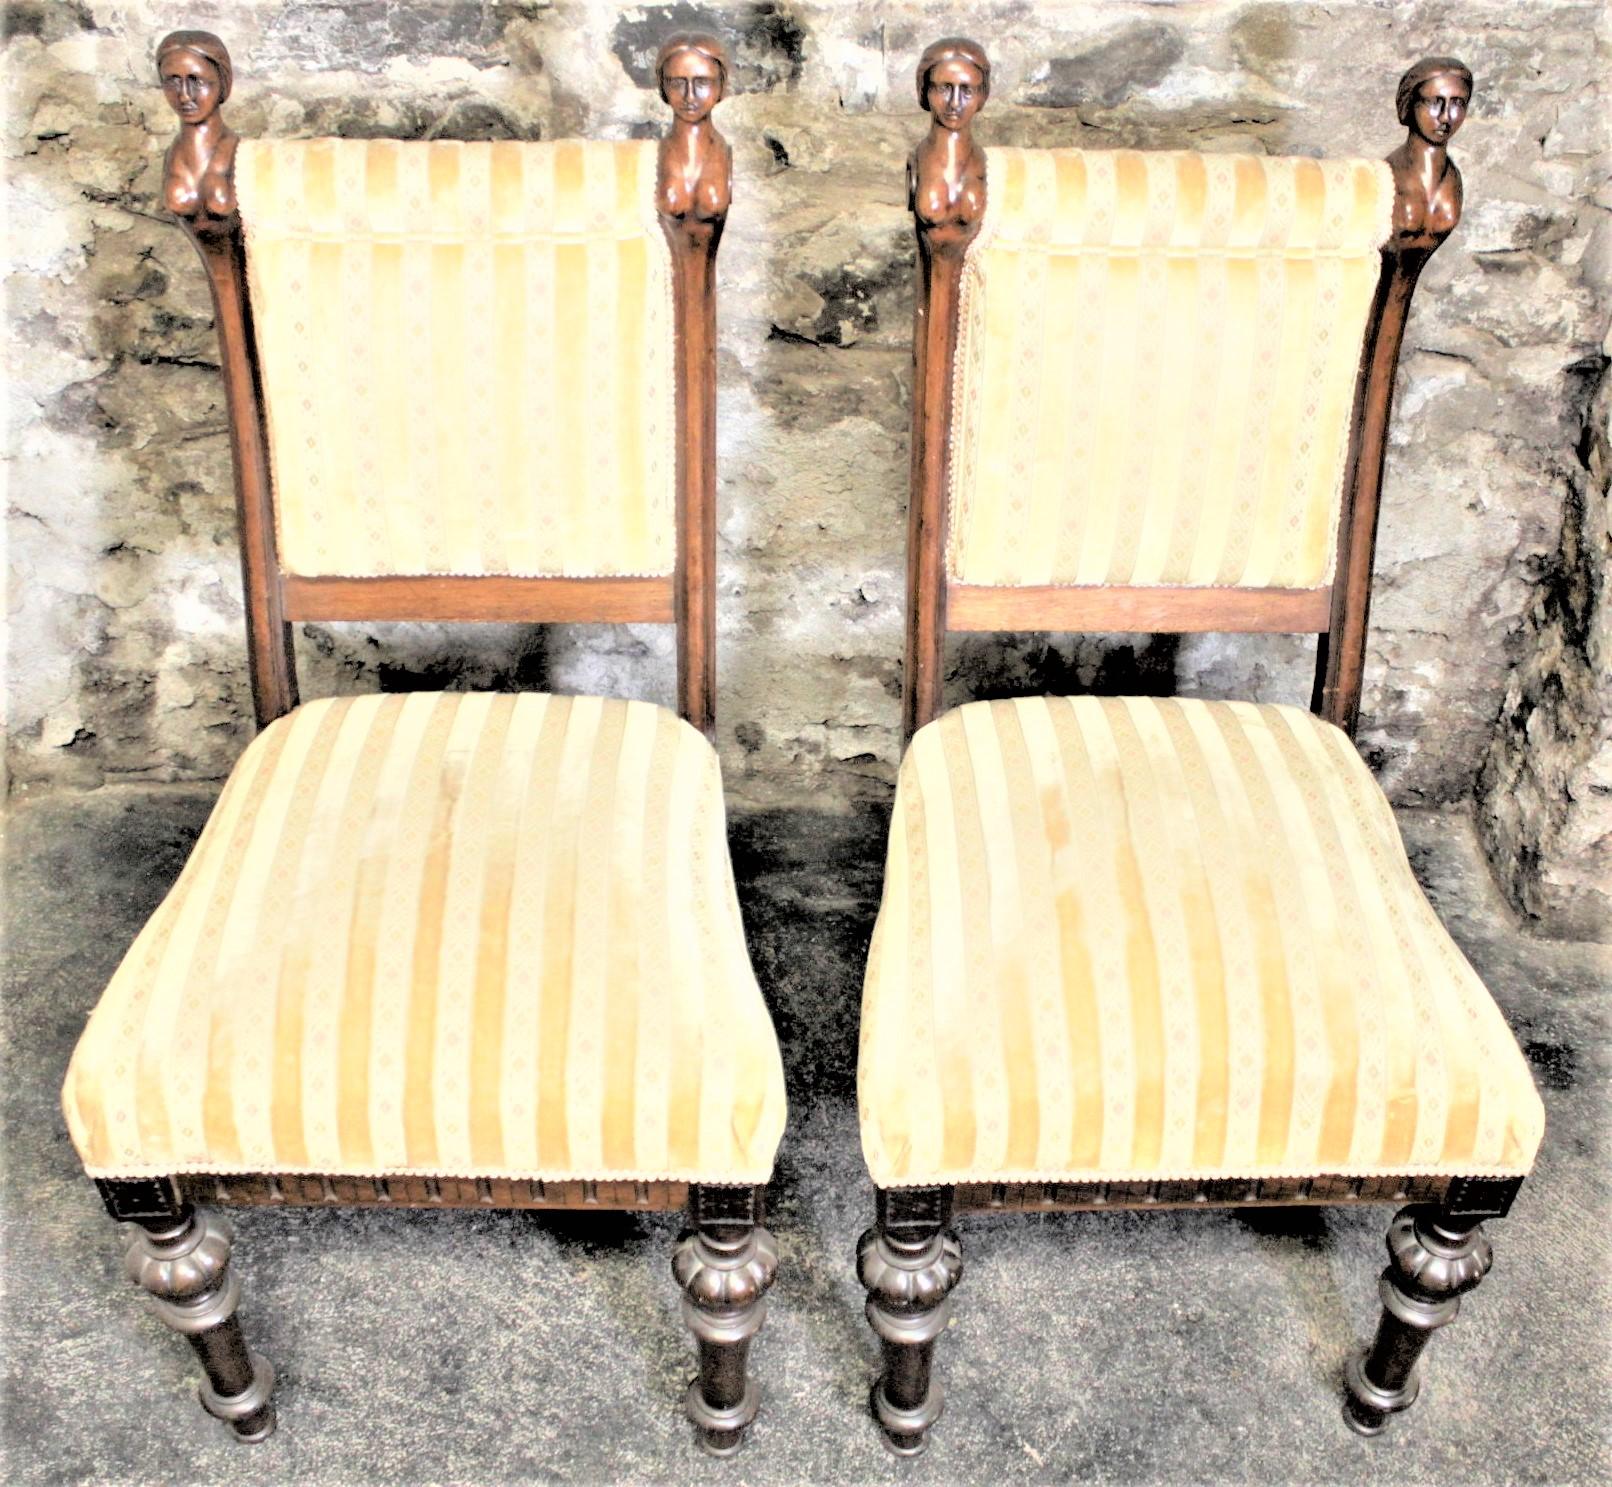 Pair of Antique American Carved Walnut Parlor Chairs with Erotic Female Accents In Good Condition For Sale In Hamilton, Ontario